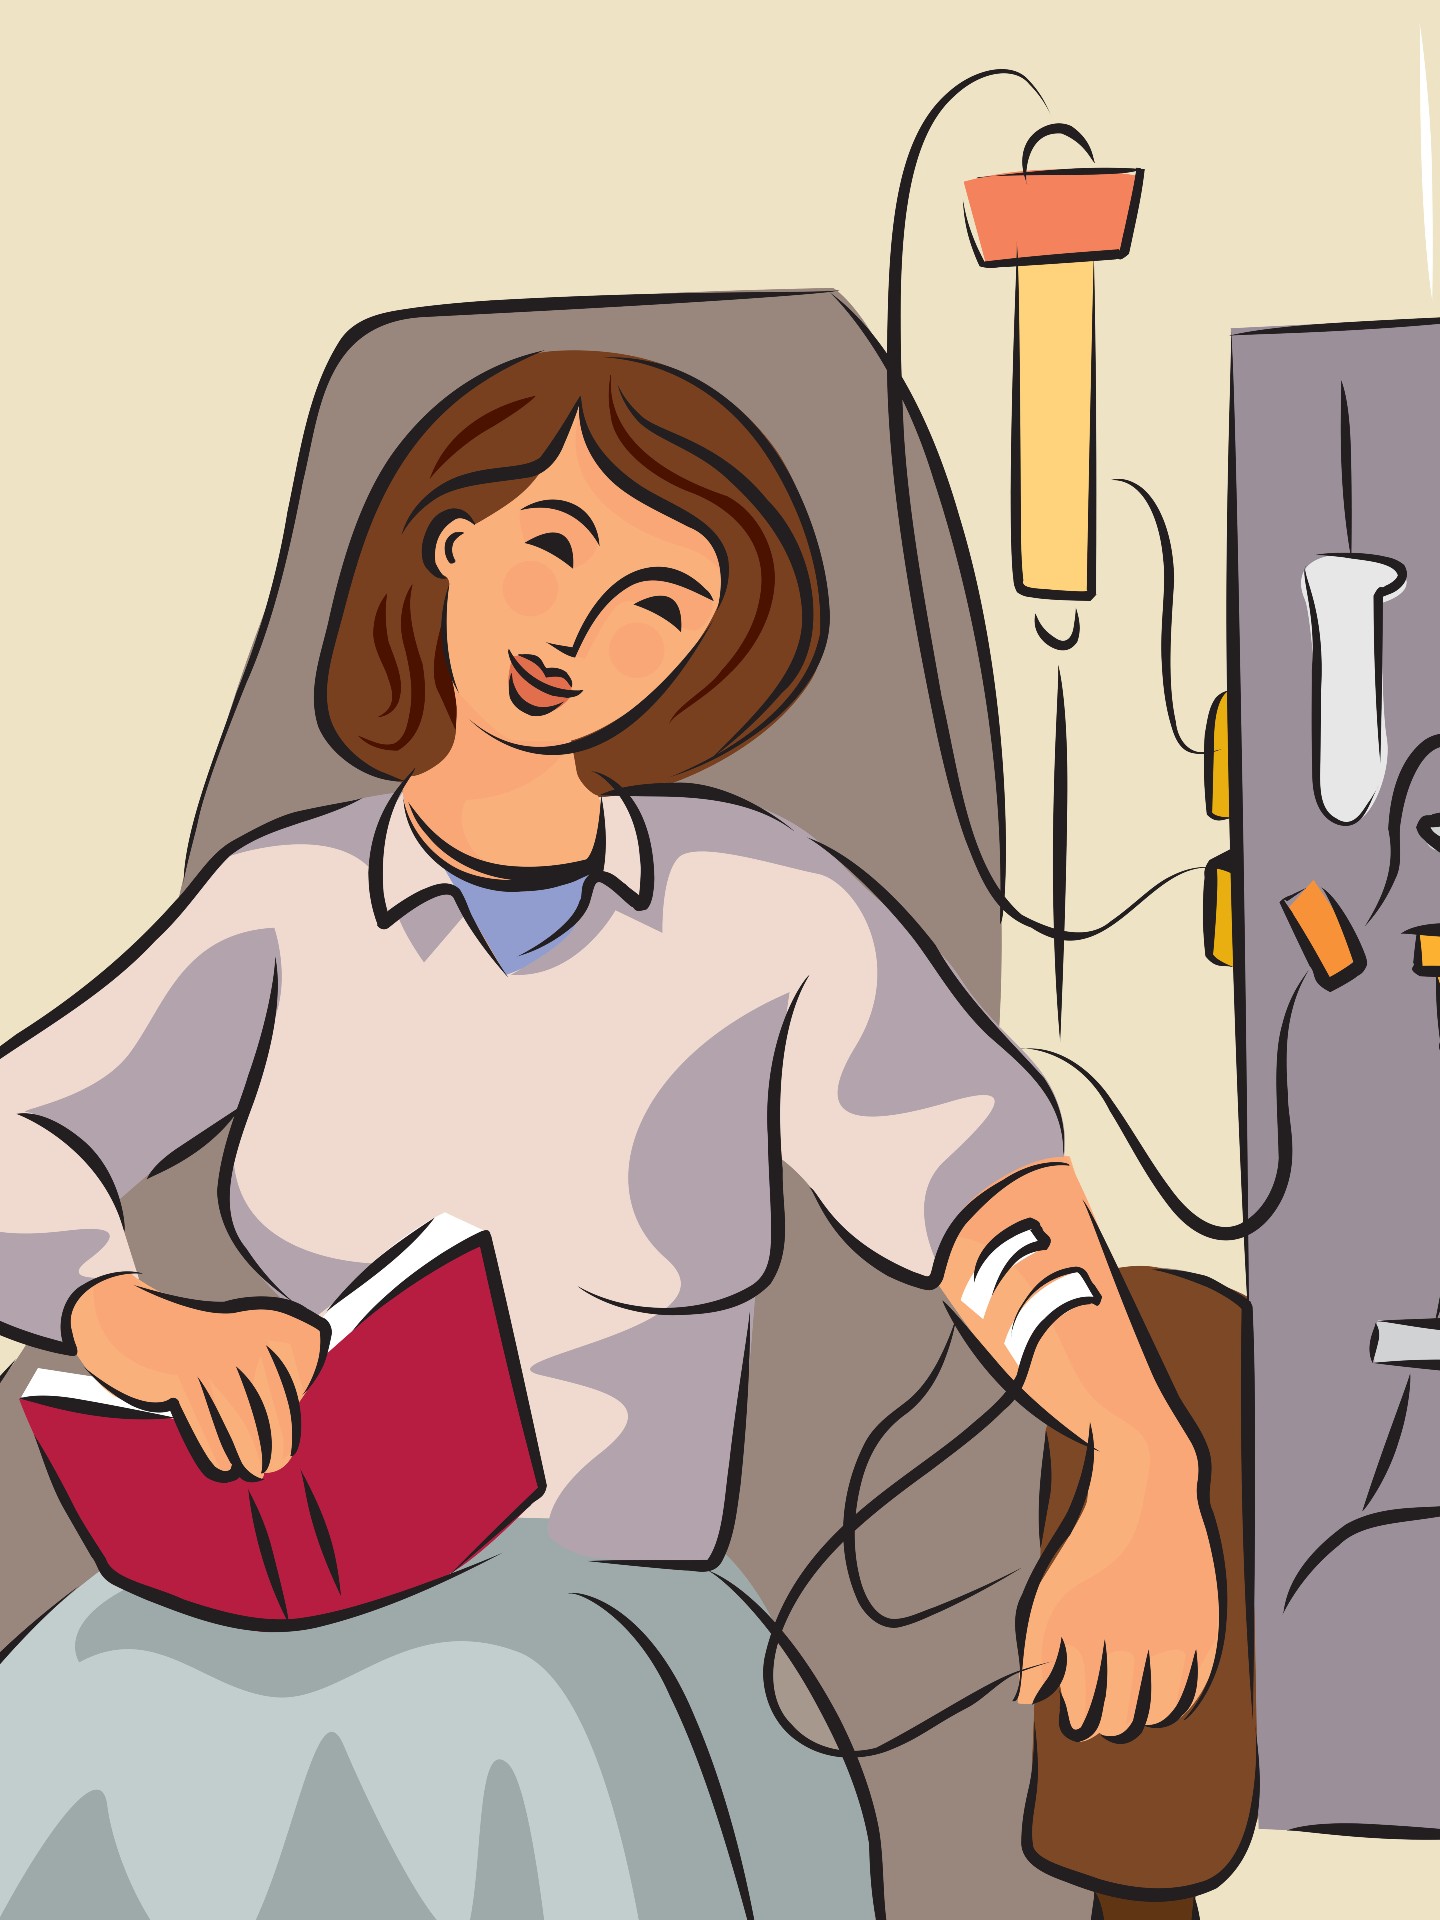 Illustration of a woman receiving dialysis